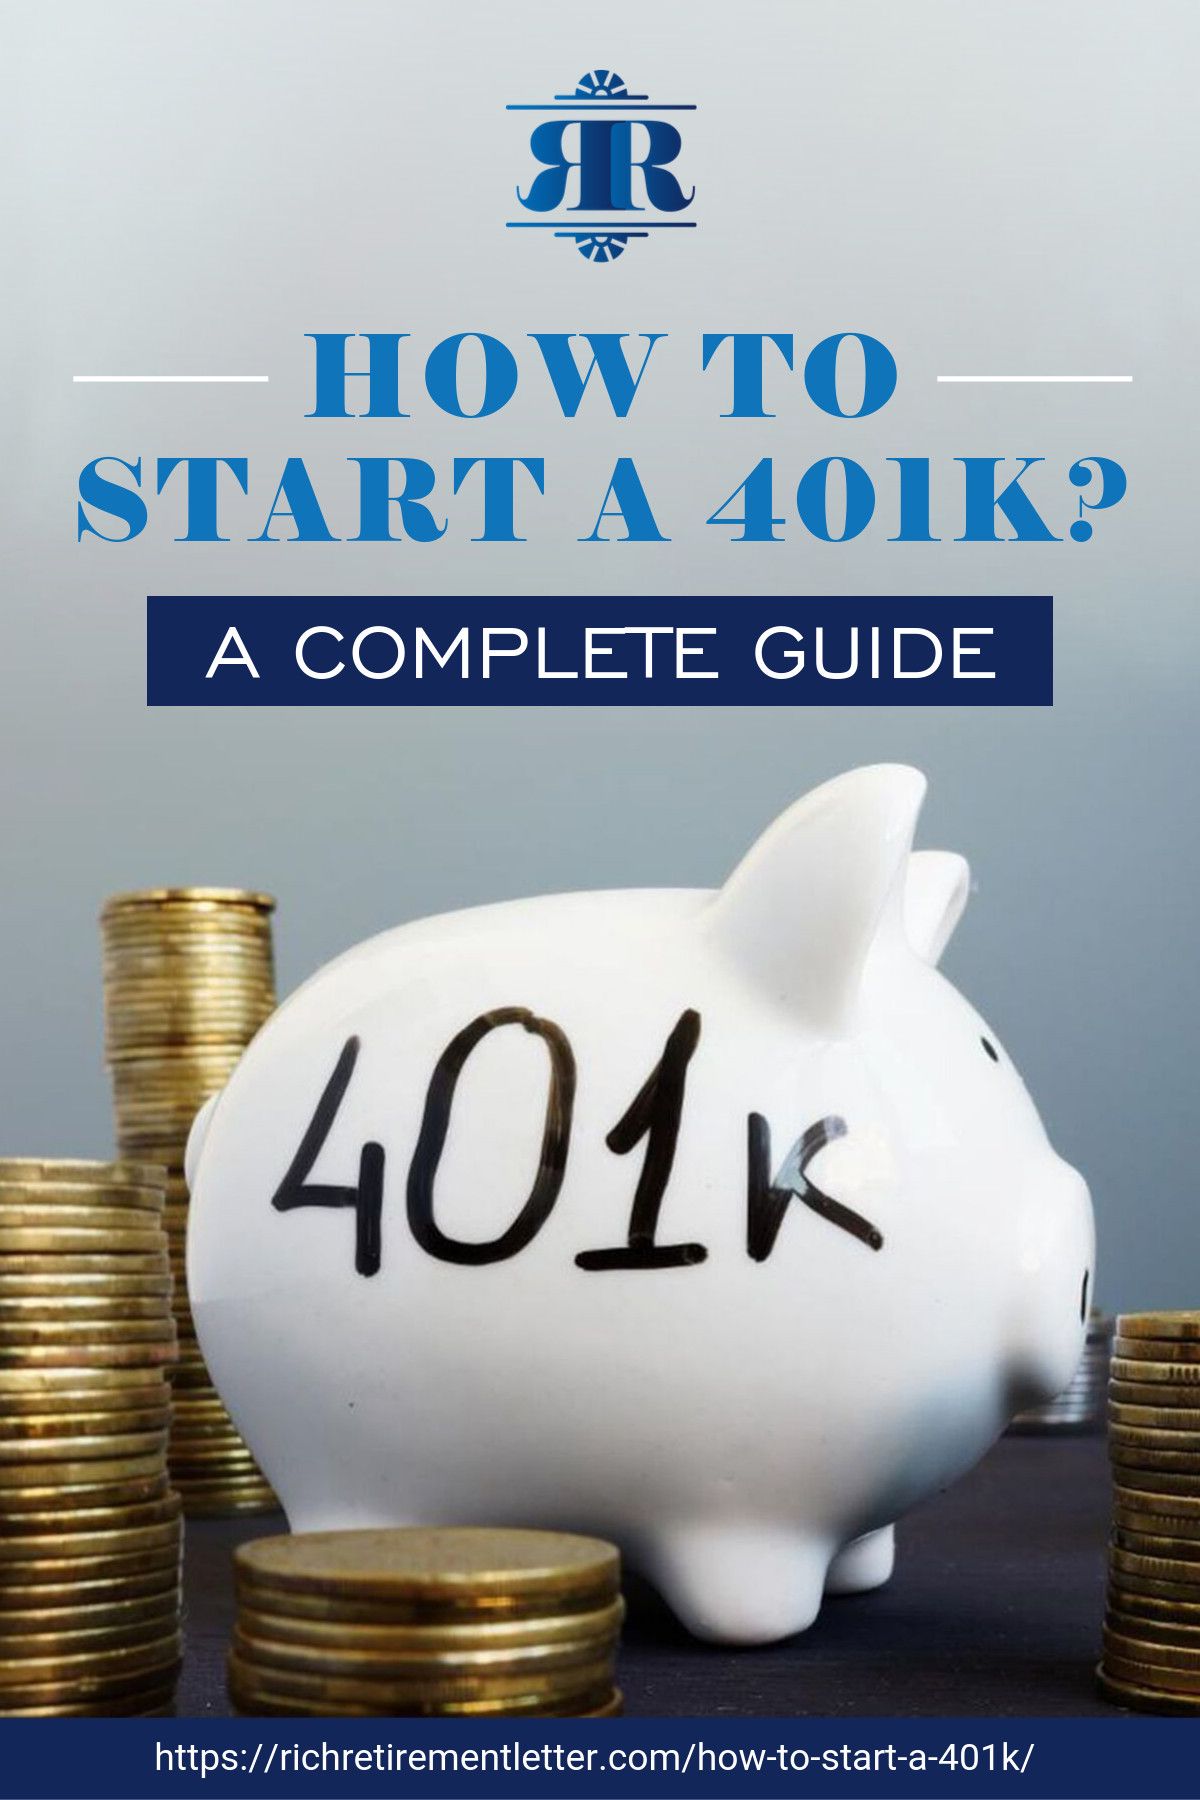 How To Start A 401(k): A Complete Guide